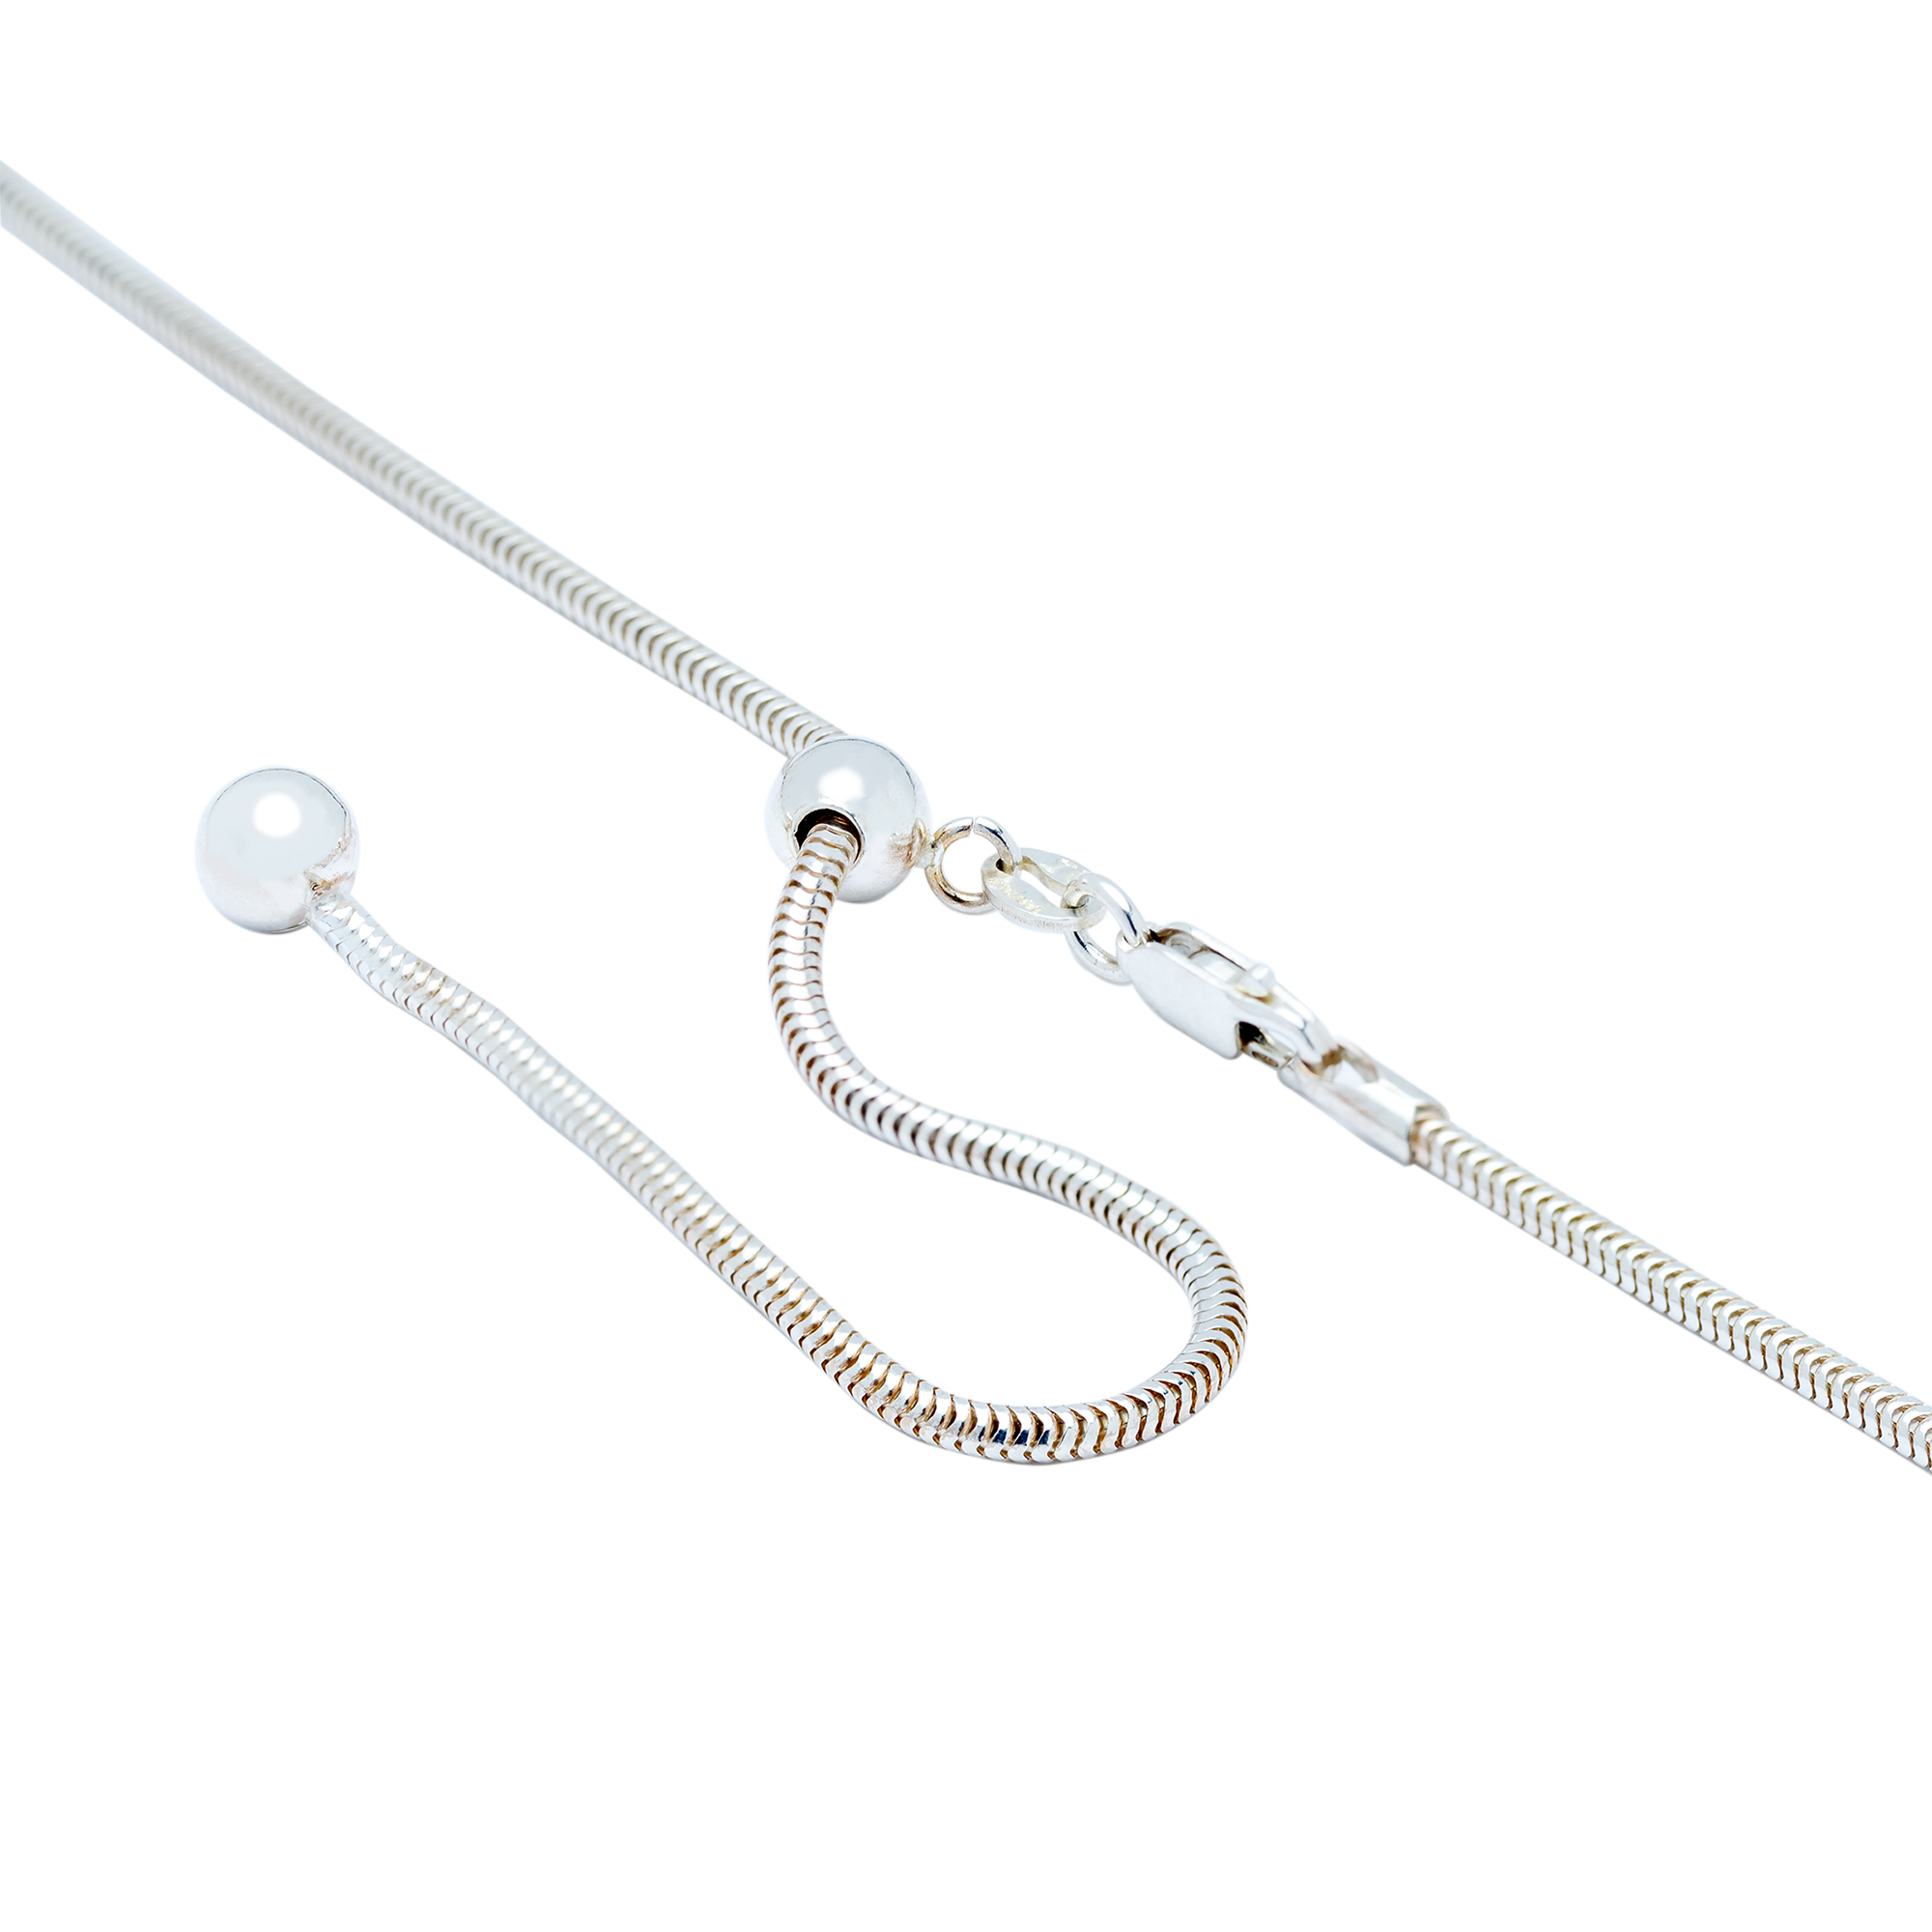 CH.DAV.1109 - 30 Inch Sterling Silver Thick Adjustable Chain